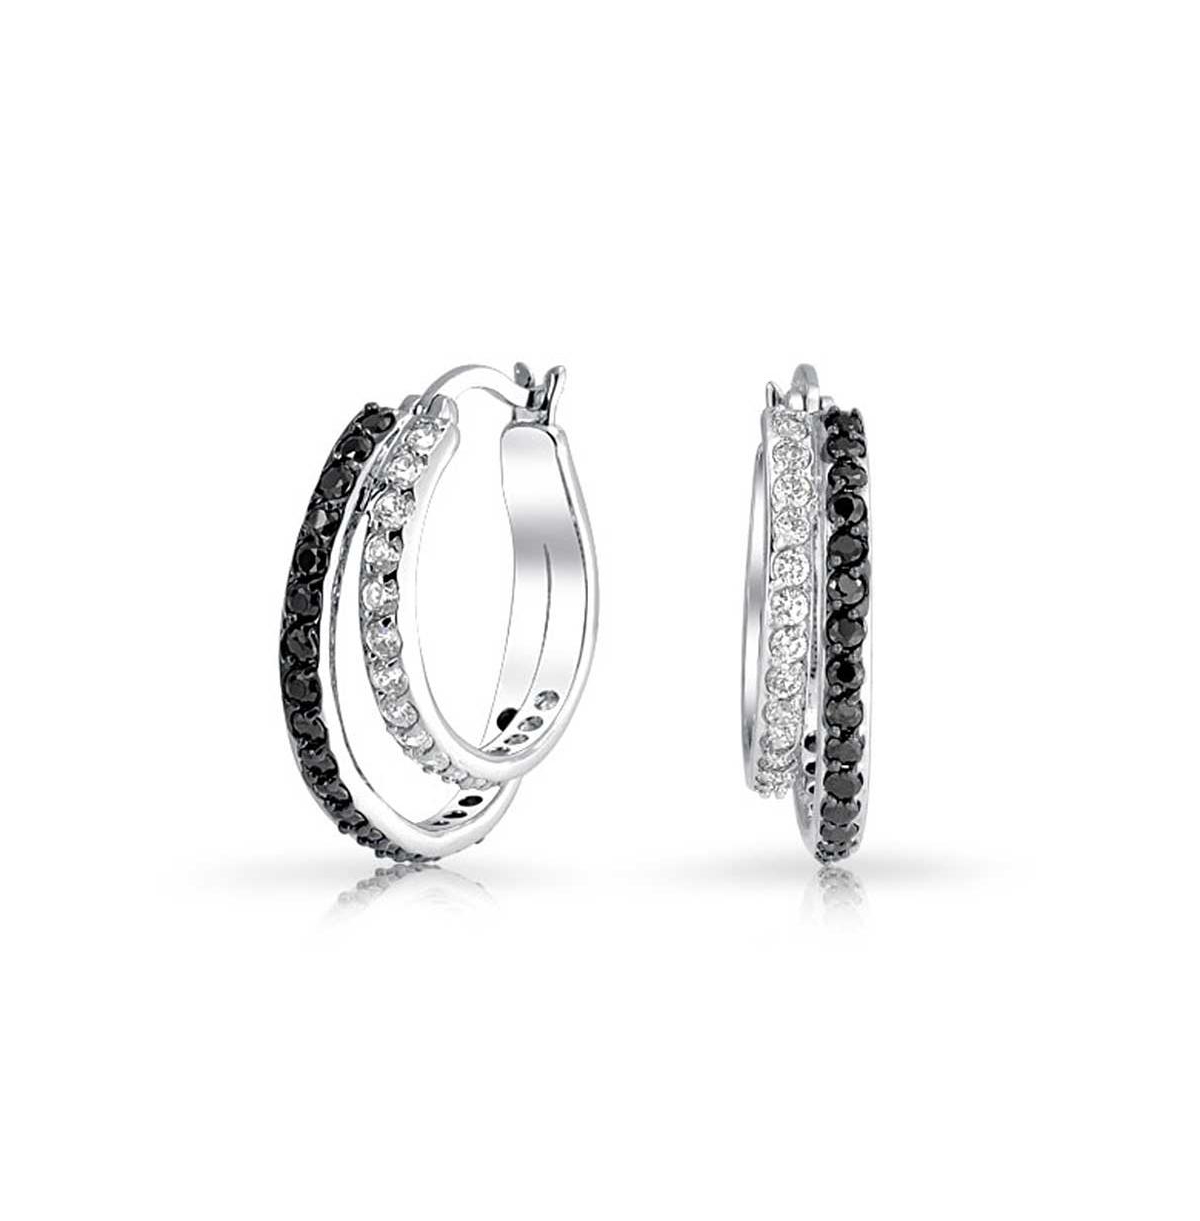 Black White Circle Cubic Zirconia Pave Cz Prom Double Hoop Earrings For Women 1.5 Inch Diameter - Black